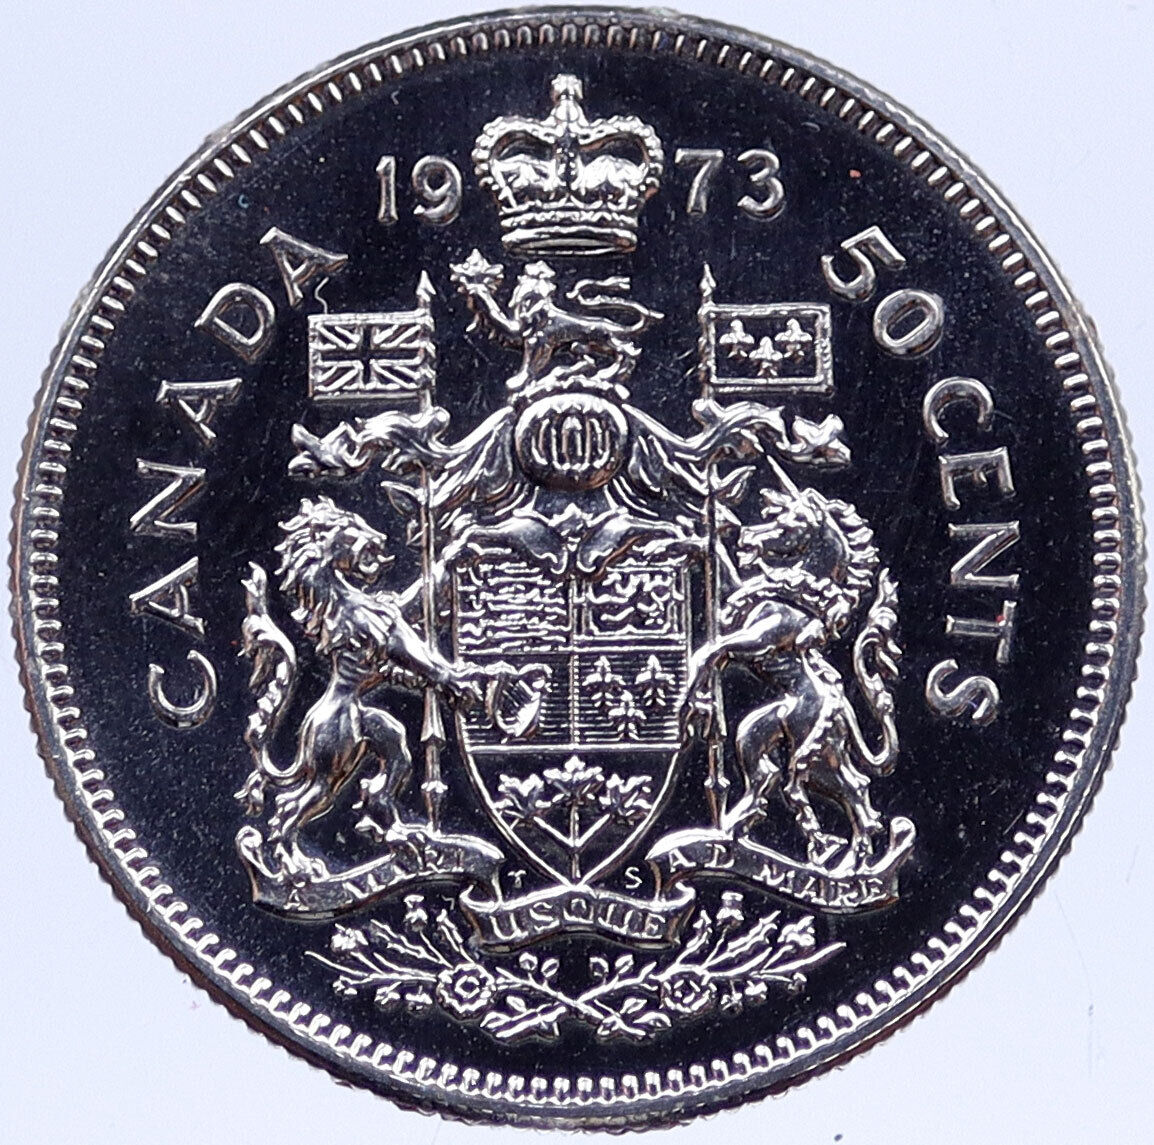 1973 CANADA under UK Queen ELIZABETH II Proof Like 50 CENTS Coin i118802